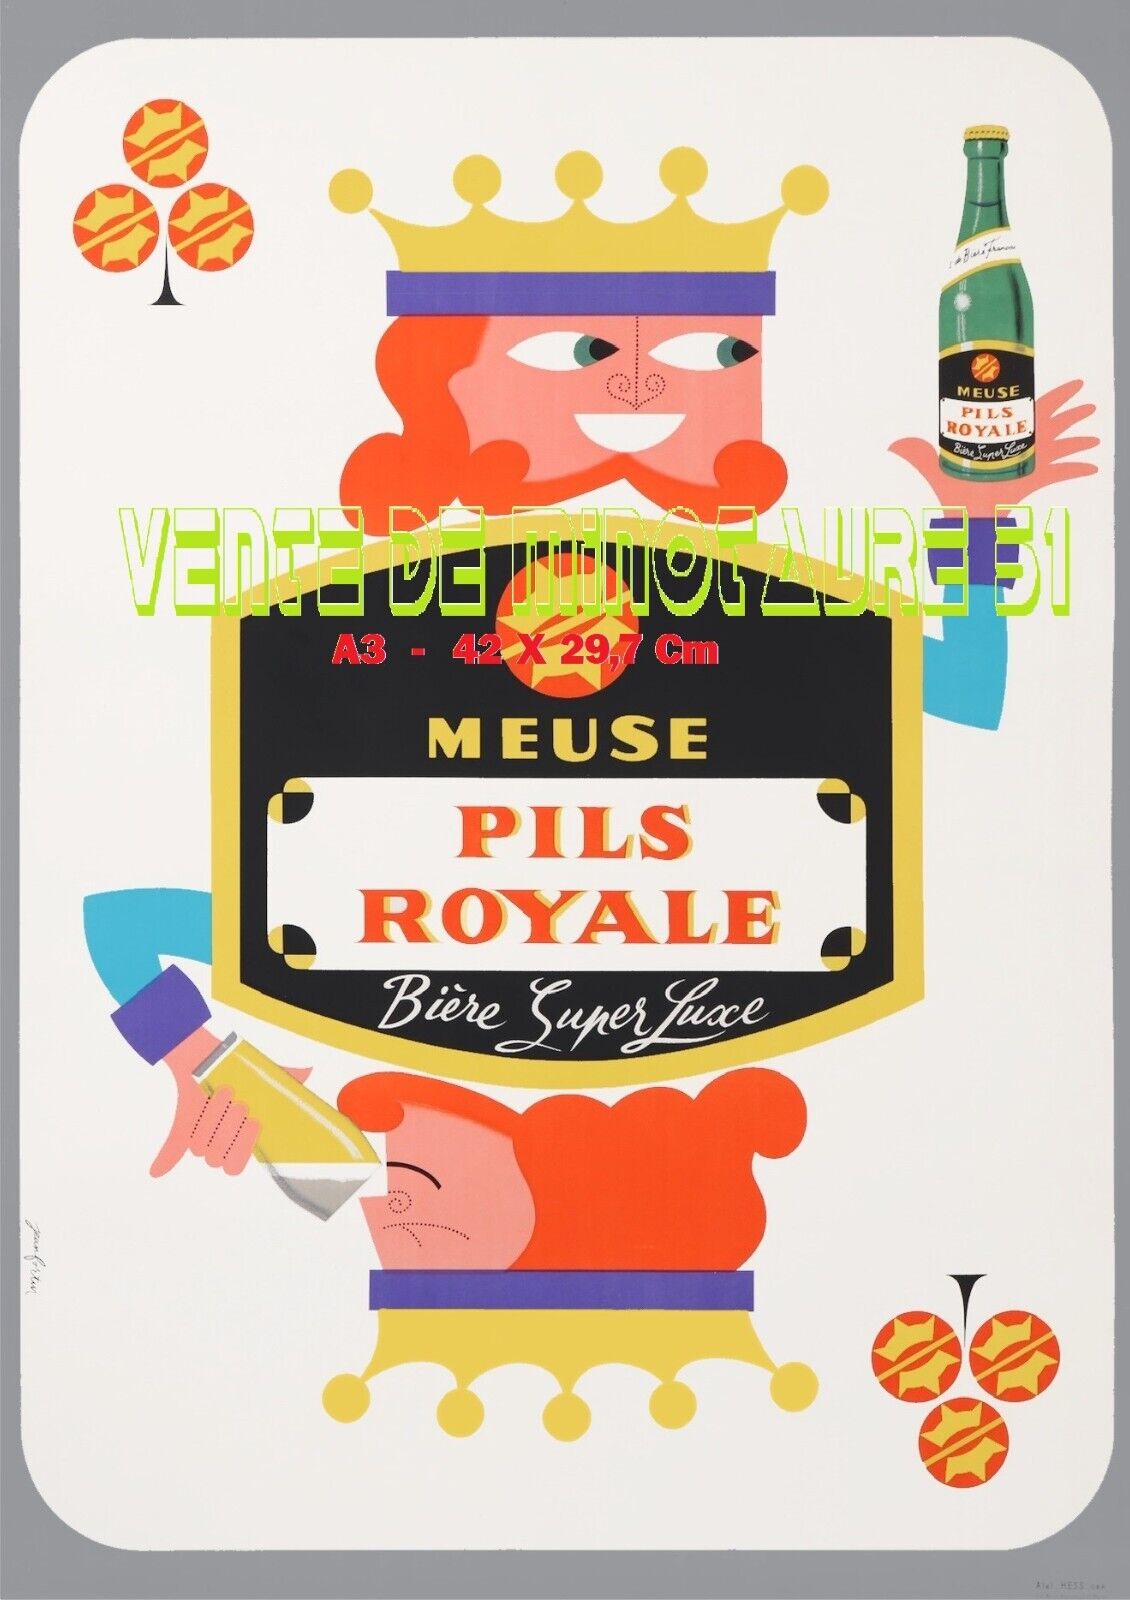 SUPER LUXURY PILS ROYALE BEER - Playing Card Style - A3 Plasticized